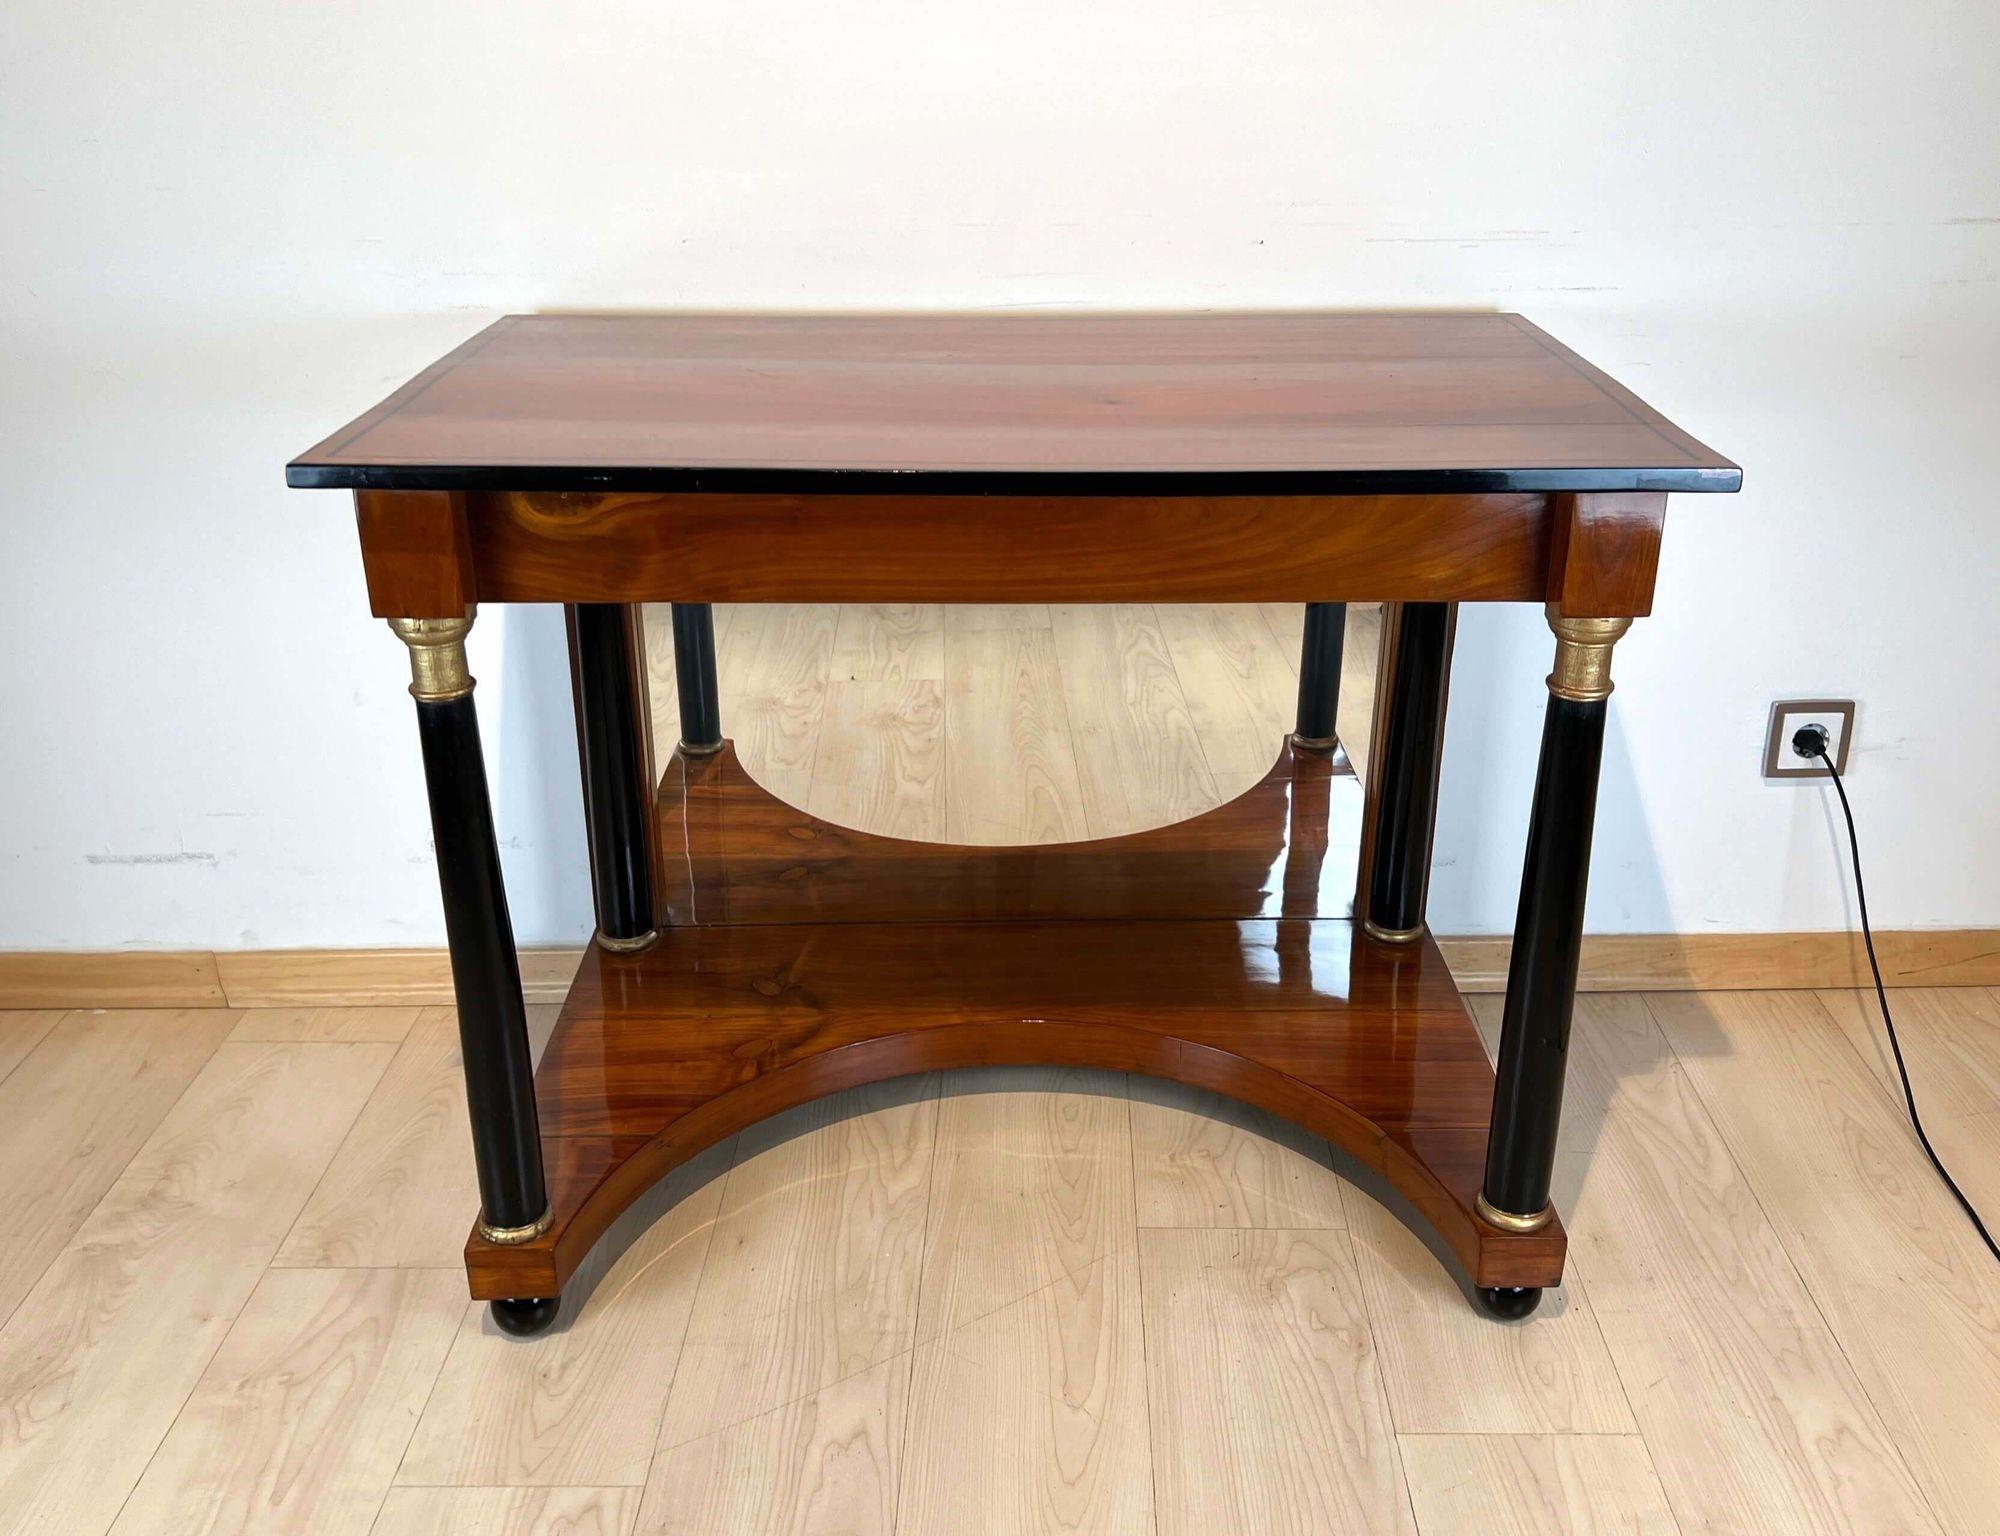 Biedermeier Console Table, Cherry Wood, Full Columns, South Germany circa 1820 For Sale 9